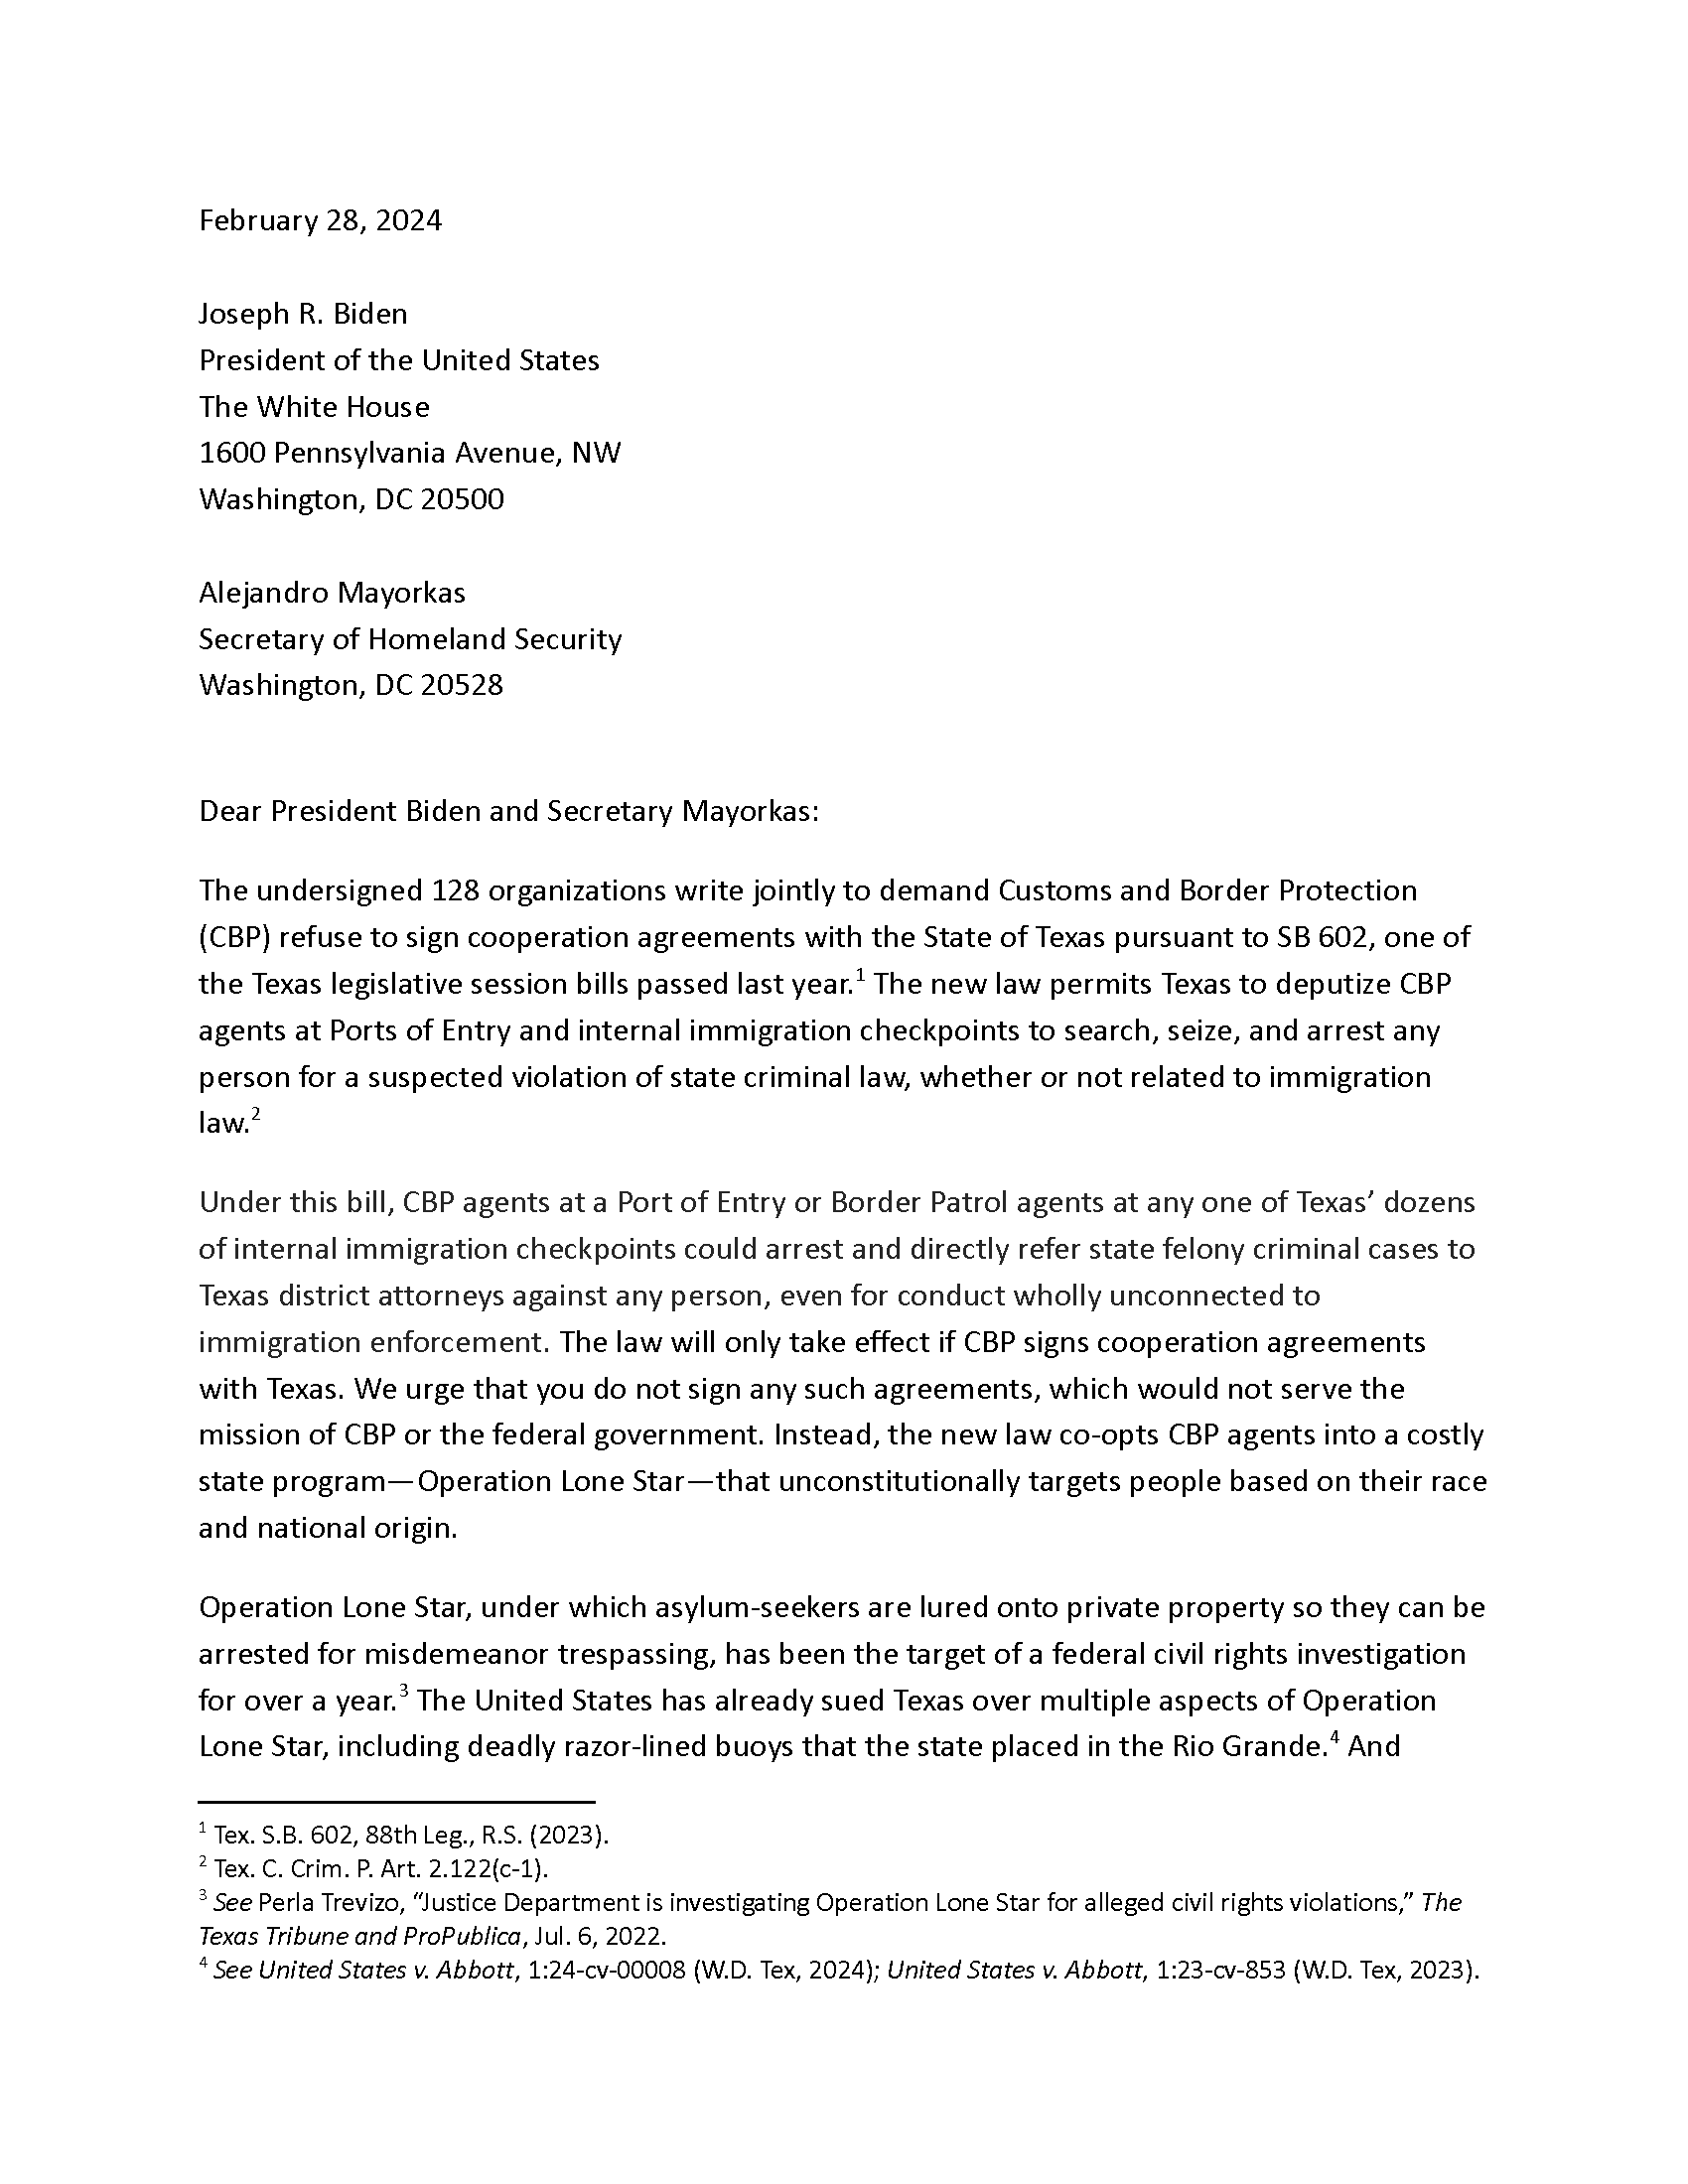 Women's Refugee Commission and 125+ Organizations Demand that the Biden ...